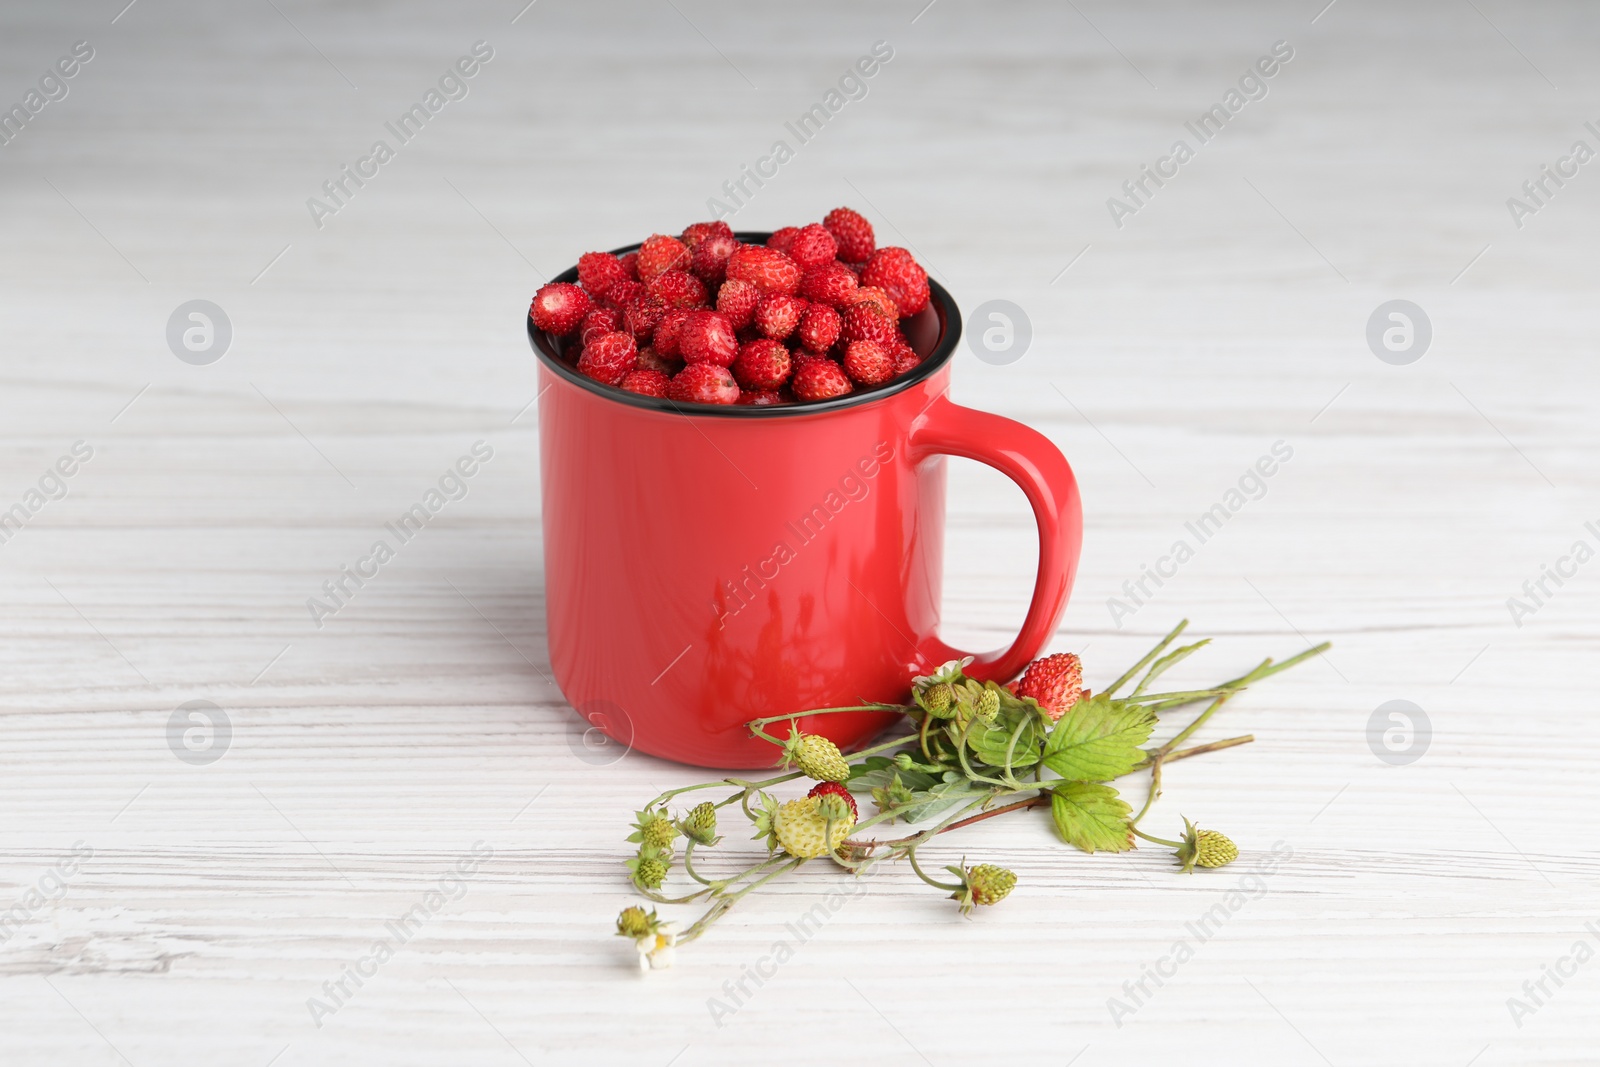 Photo of Fresh wild strawberries in mug and green stems on white wooden table